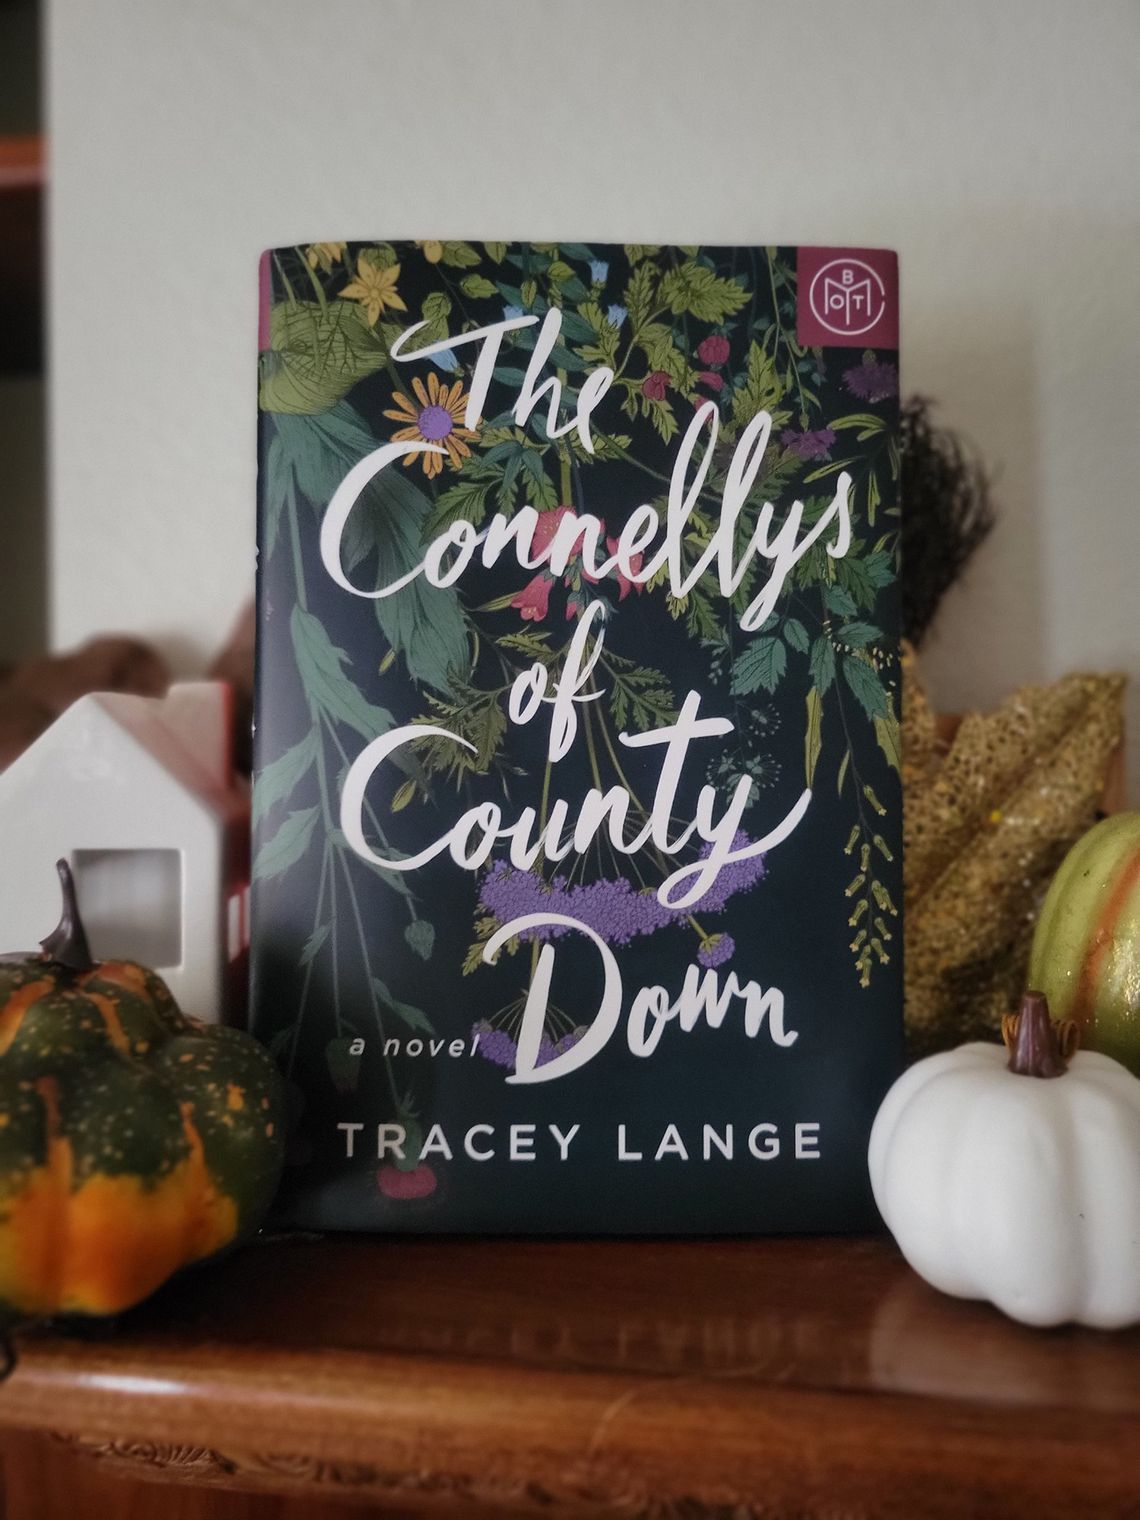 Allison’s Book Report - “The Connellys of County Down” by Tracey Lange